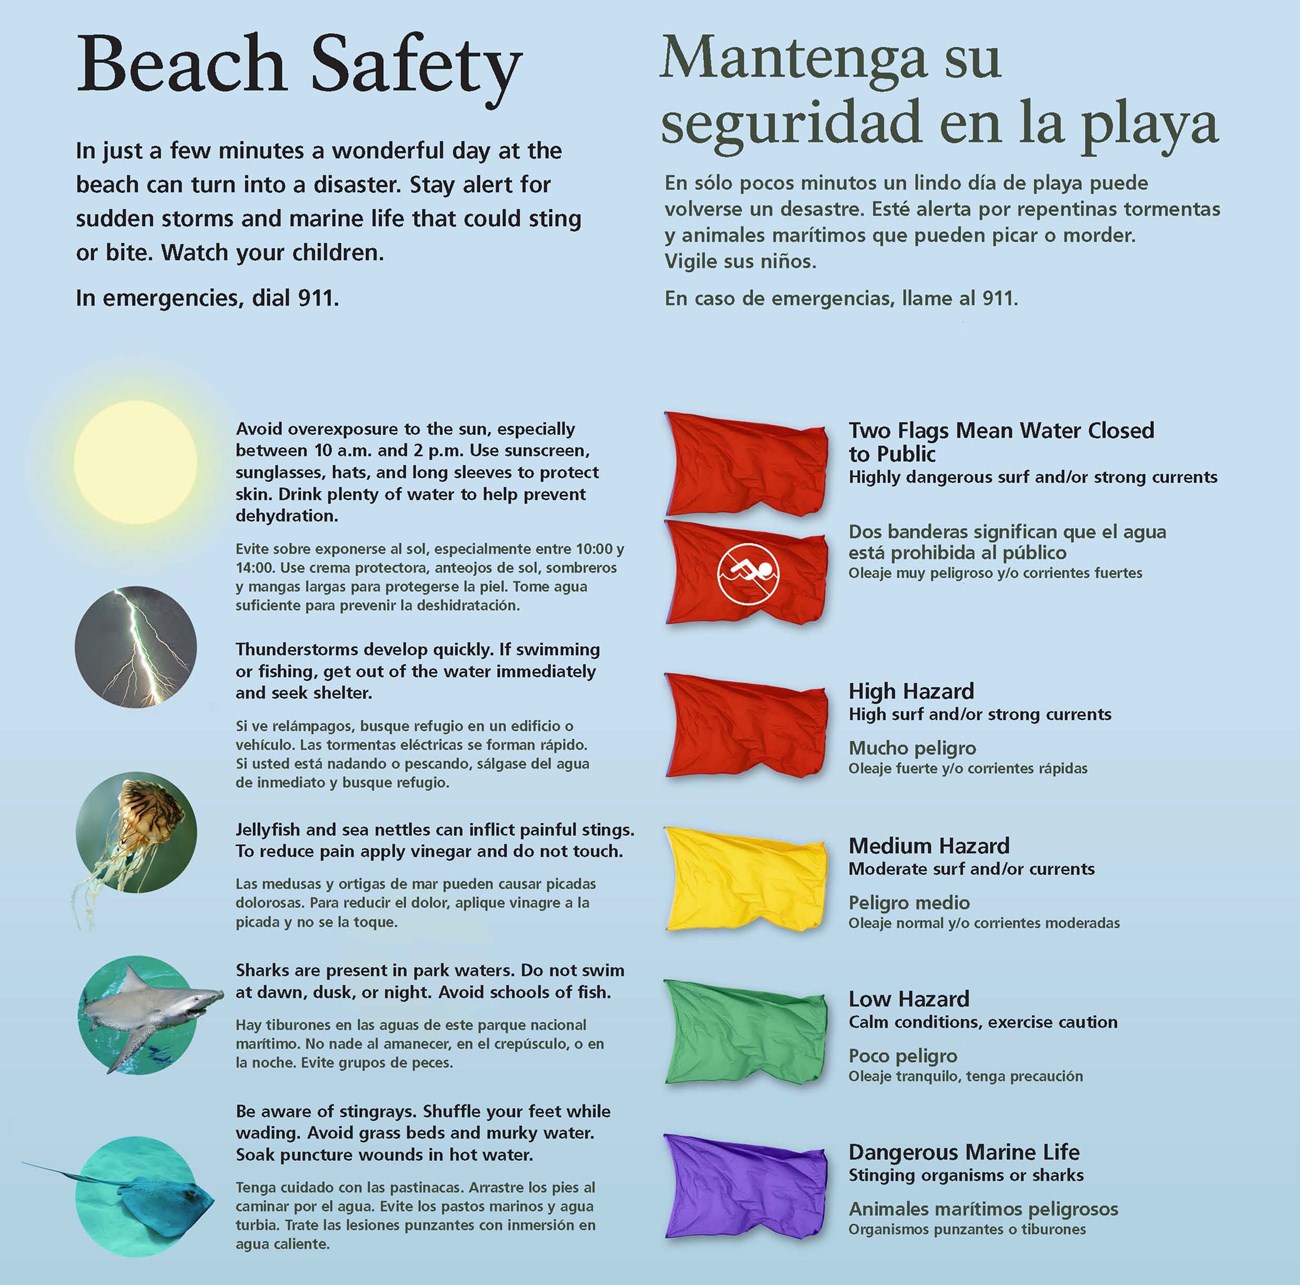 Signs with beach safety information as well as flags showing beach conditions